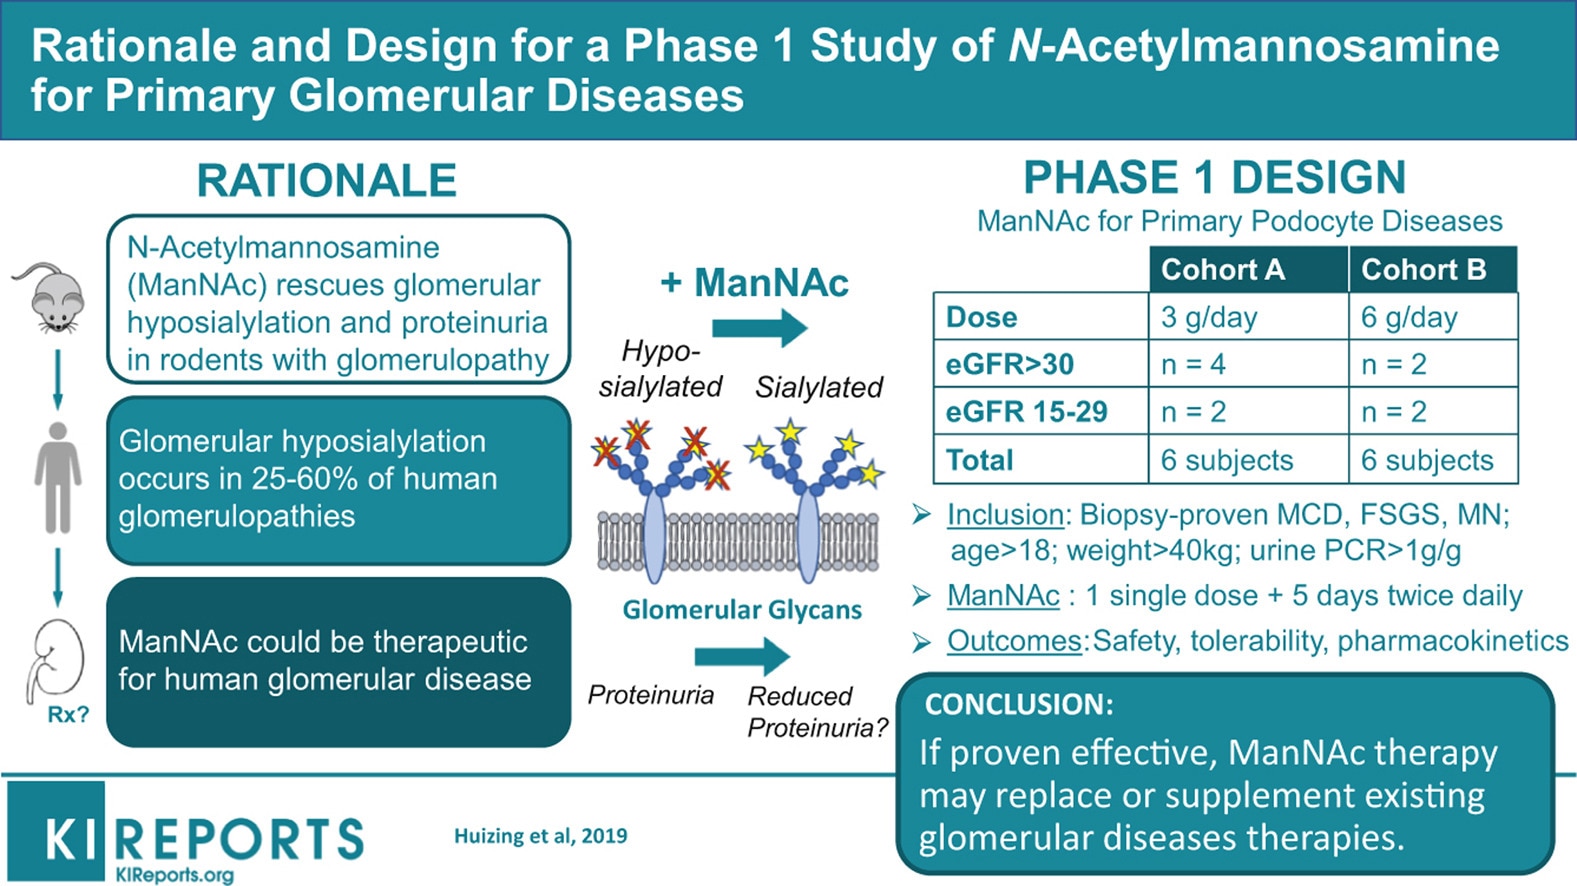 Rationale and design for a phase 1 study of N-acetylmannosamine for primary glomerular diseases.